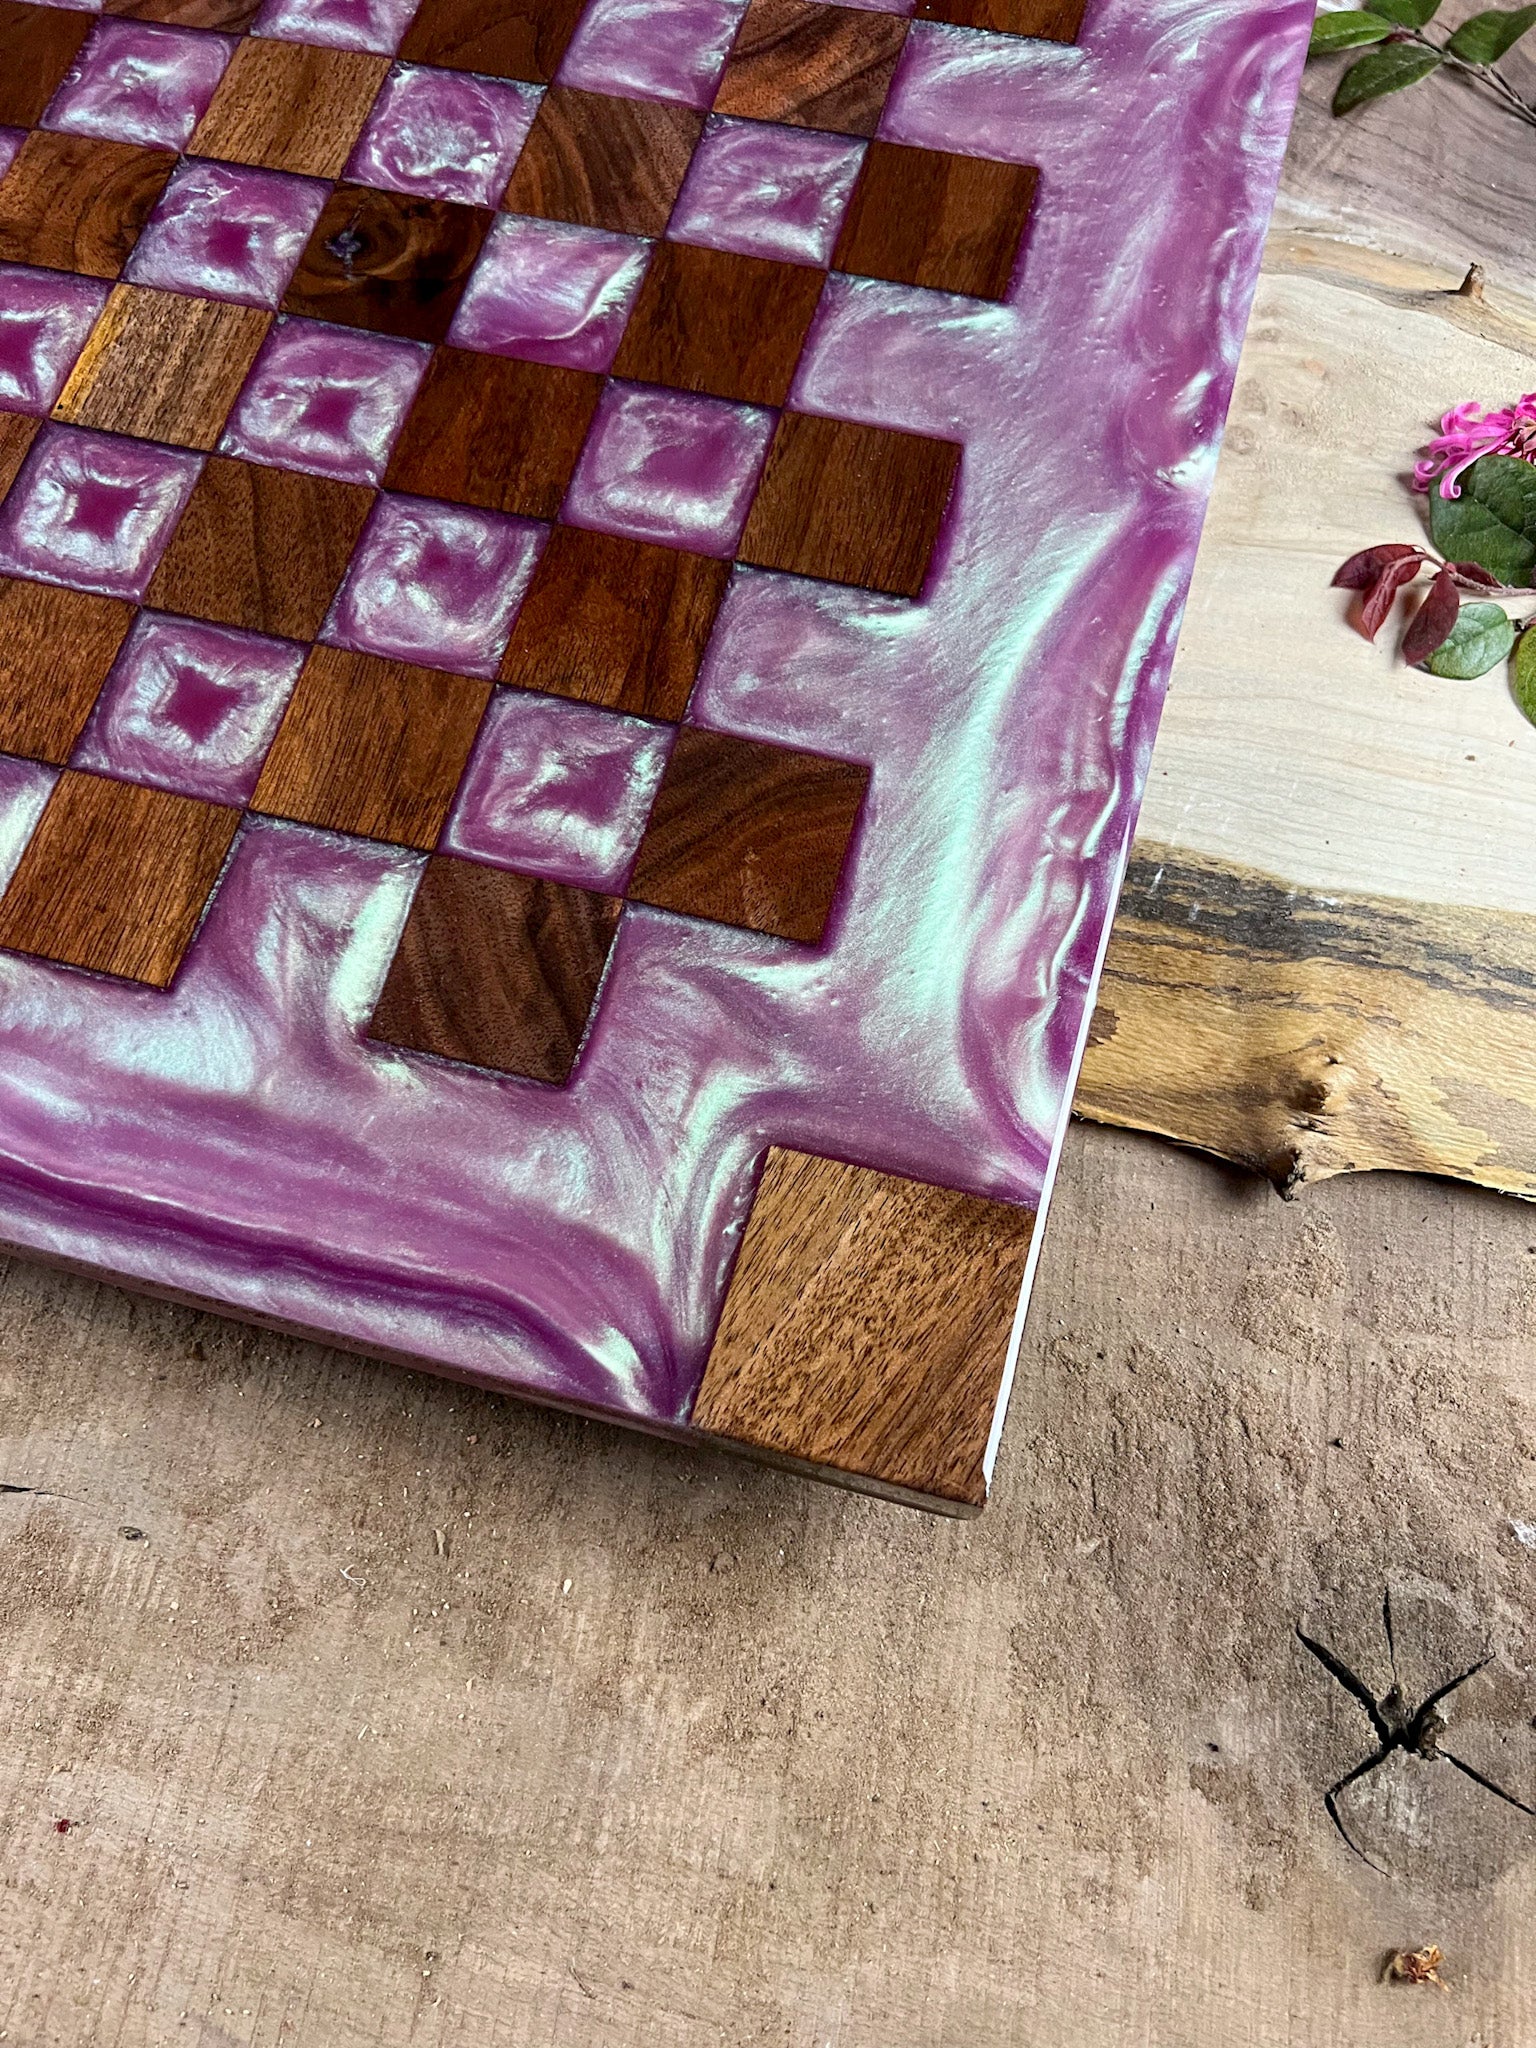 Aphrodite's Obsession Walnut Chess Board (Chameleon Color Shifting)